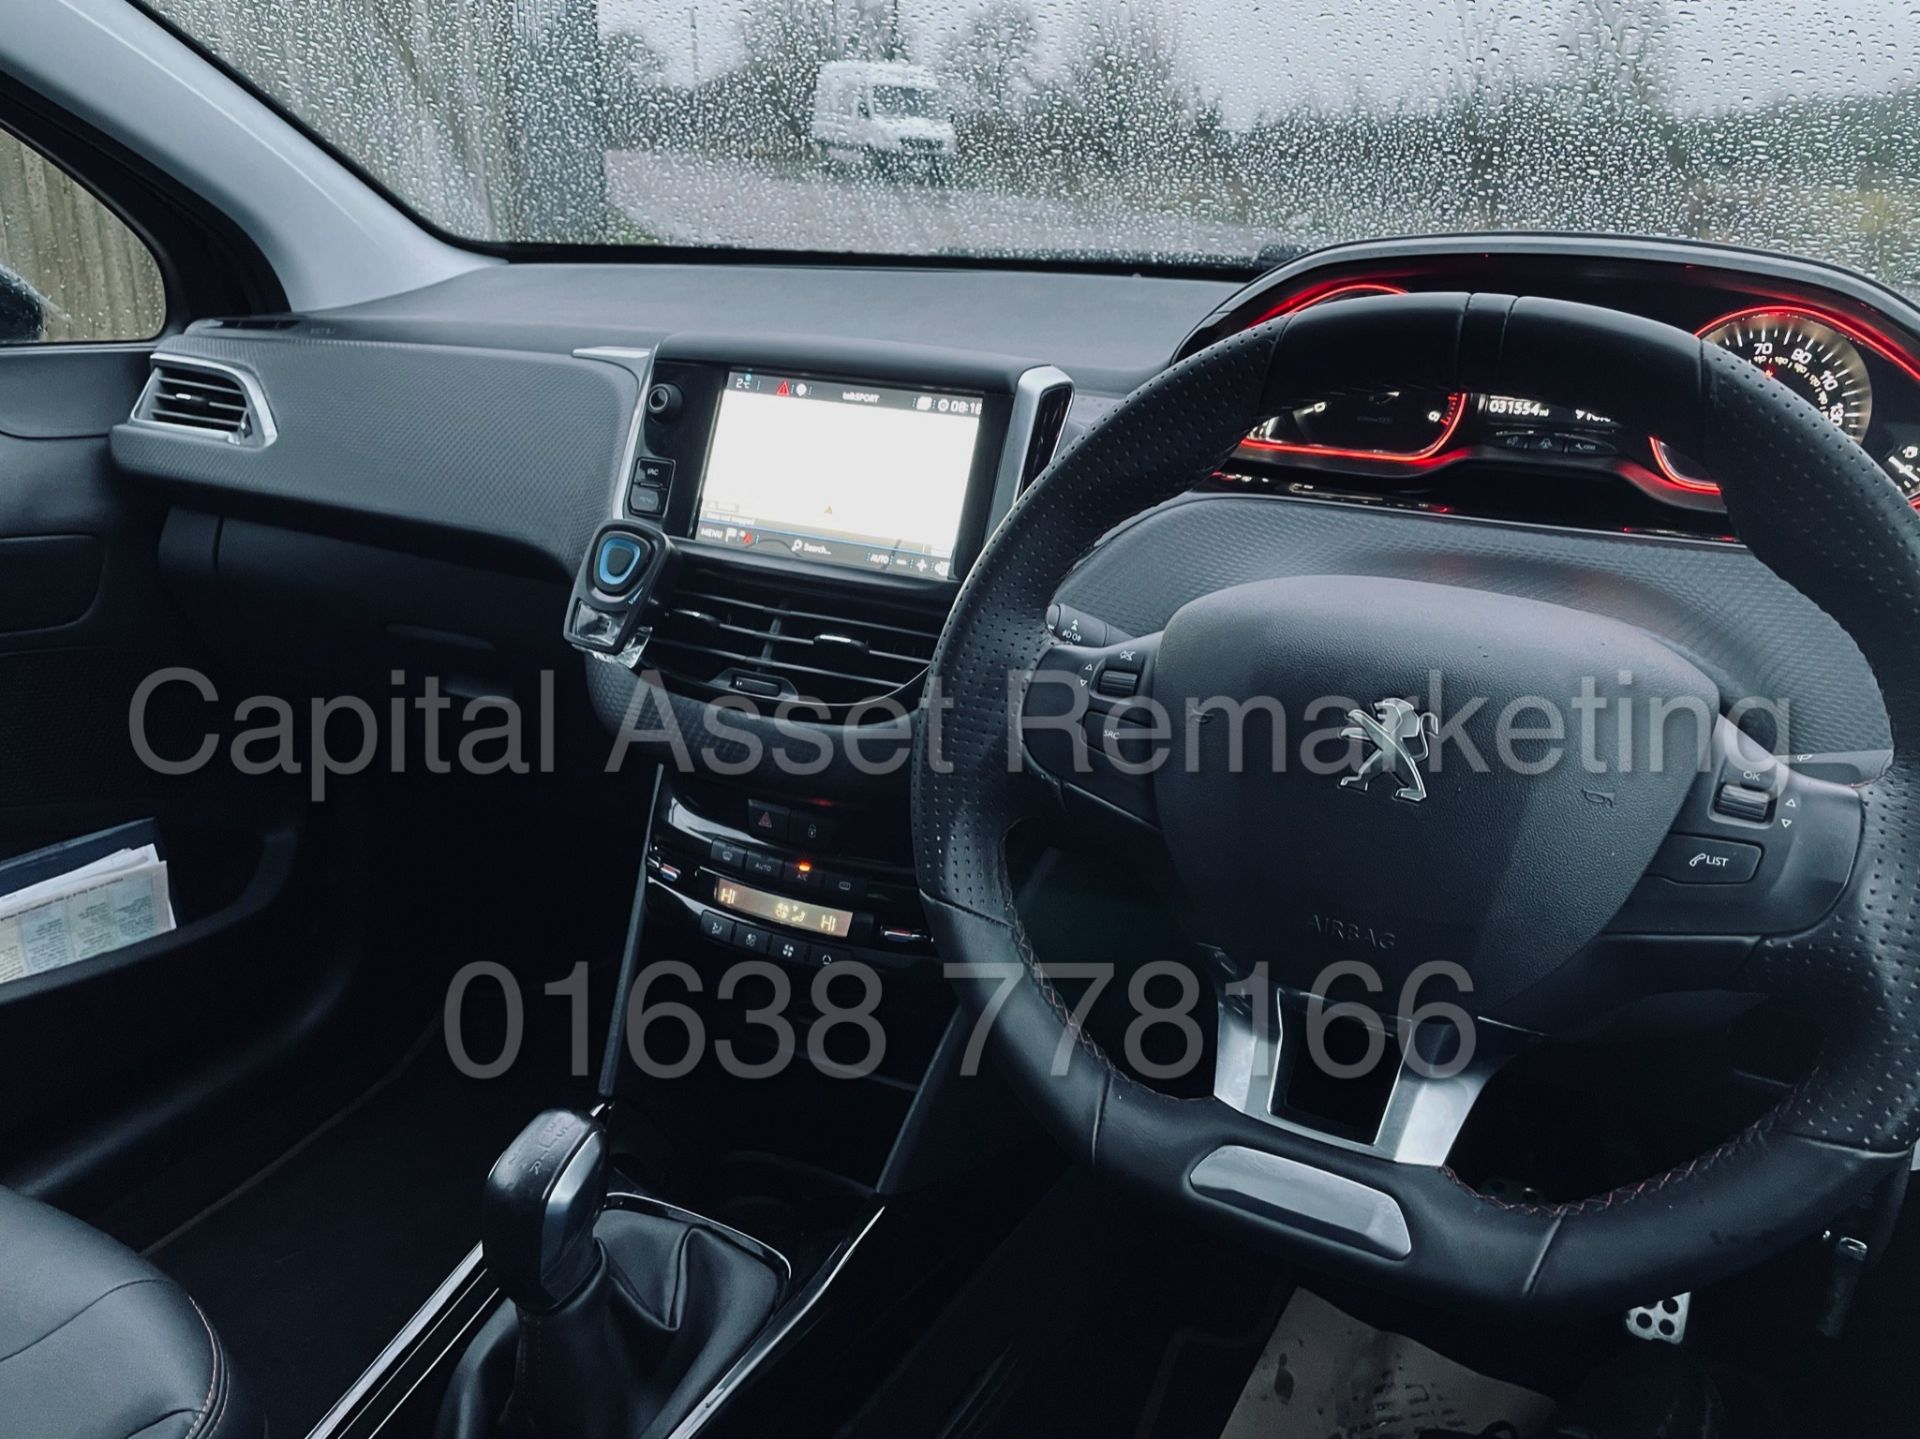 PEUGEOT 2008 *GT LINE* SUV / MPV (2019 - EURO 6) '1.5 BLUE HDI' *SAT NAV - PAN ROOF' *LOW MILES* - Image 36 of 46